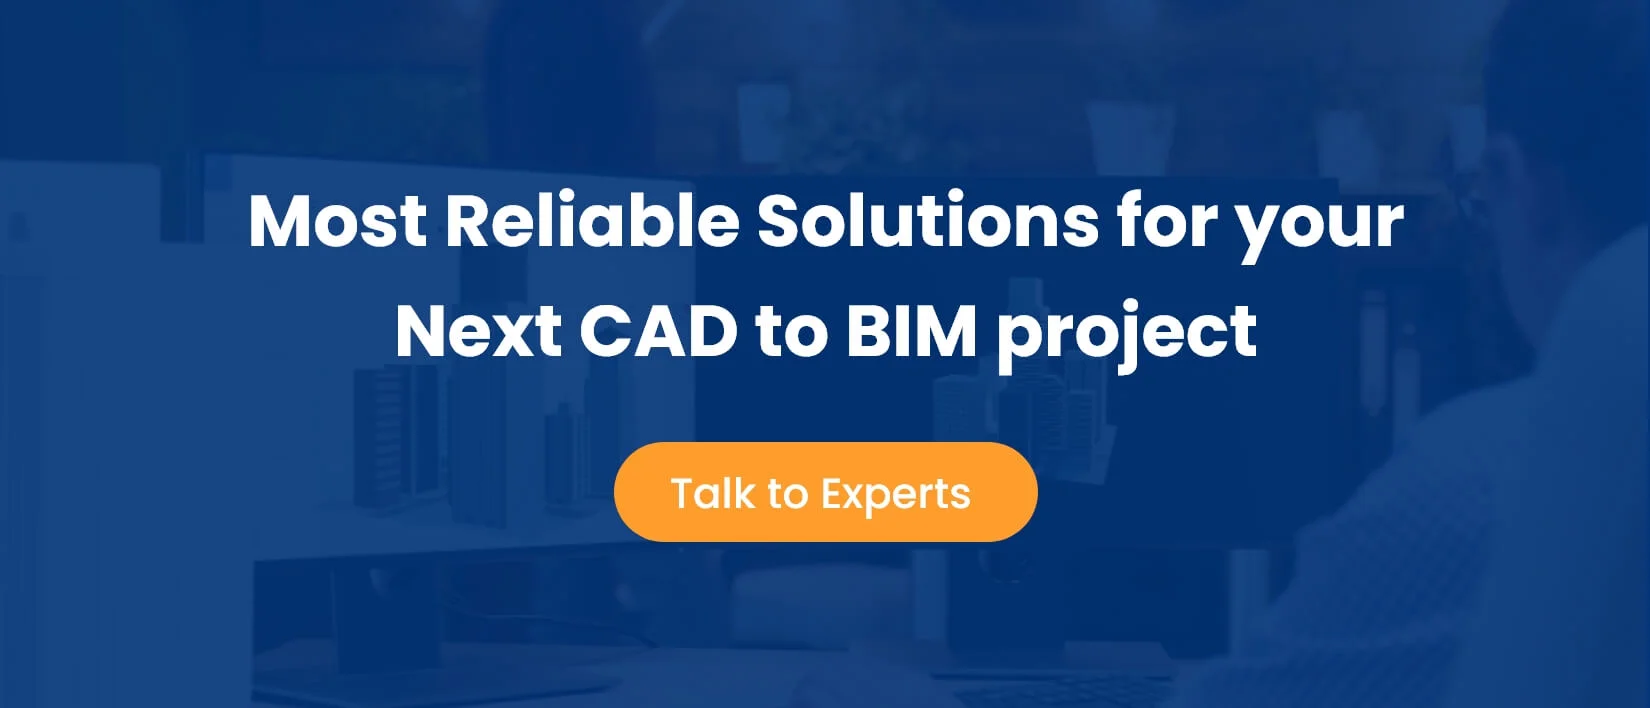 Most Reliable Solutions for your Next CAD to BIM project